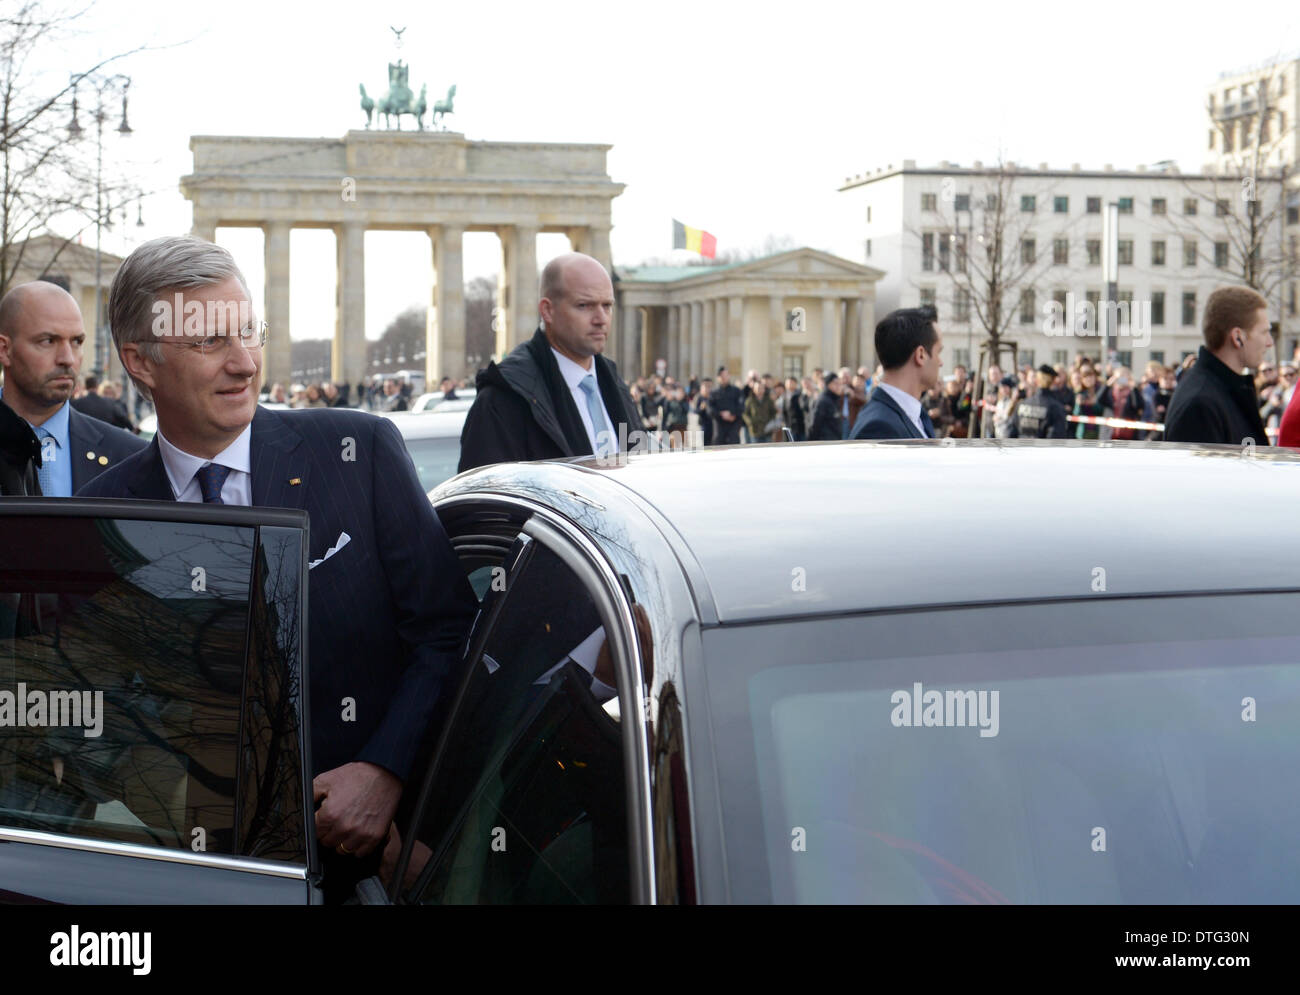 Berlin, Germany. 17th Feb, 2014. Belgian King Philippe gets into a car ...